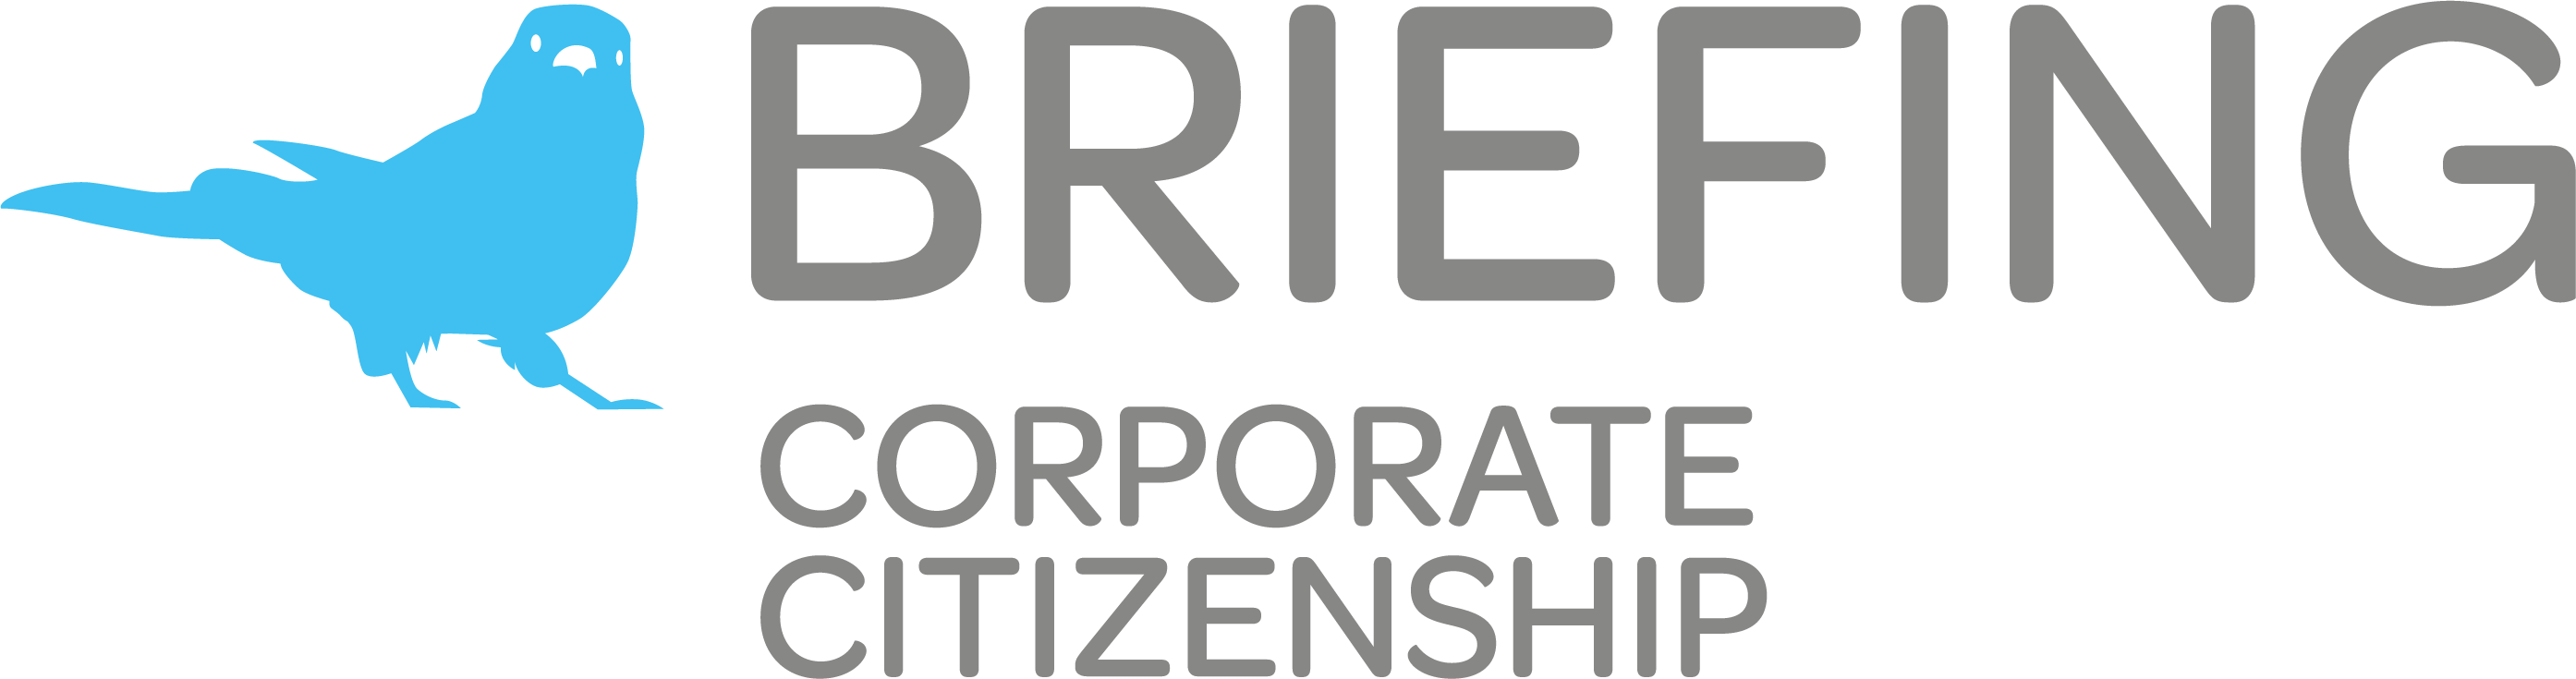 Citizenship Logo - CCBriefing | Corporate Responsibility & Sustainability News